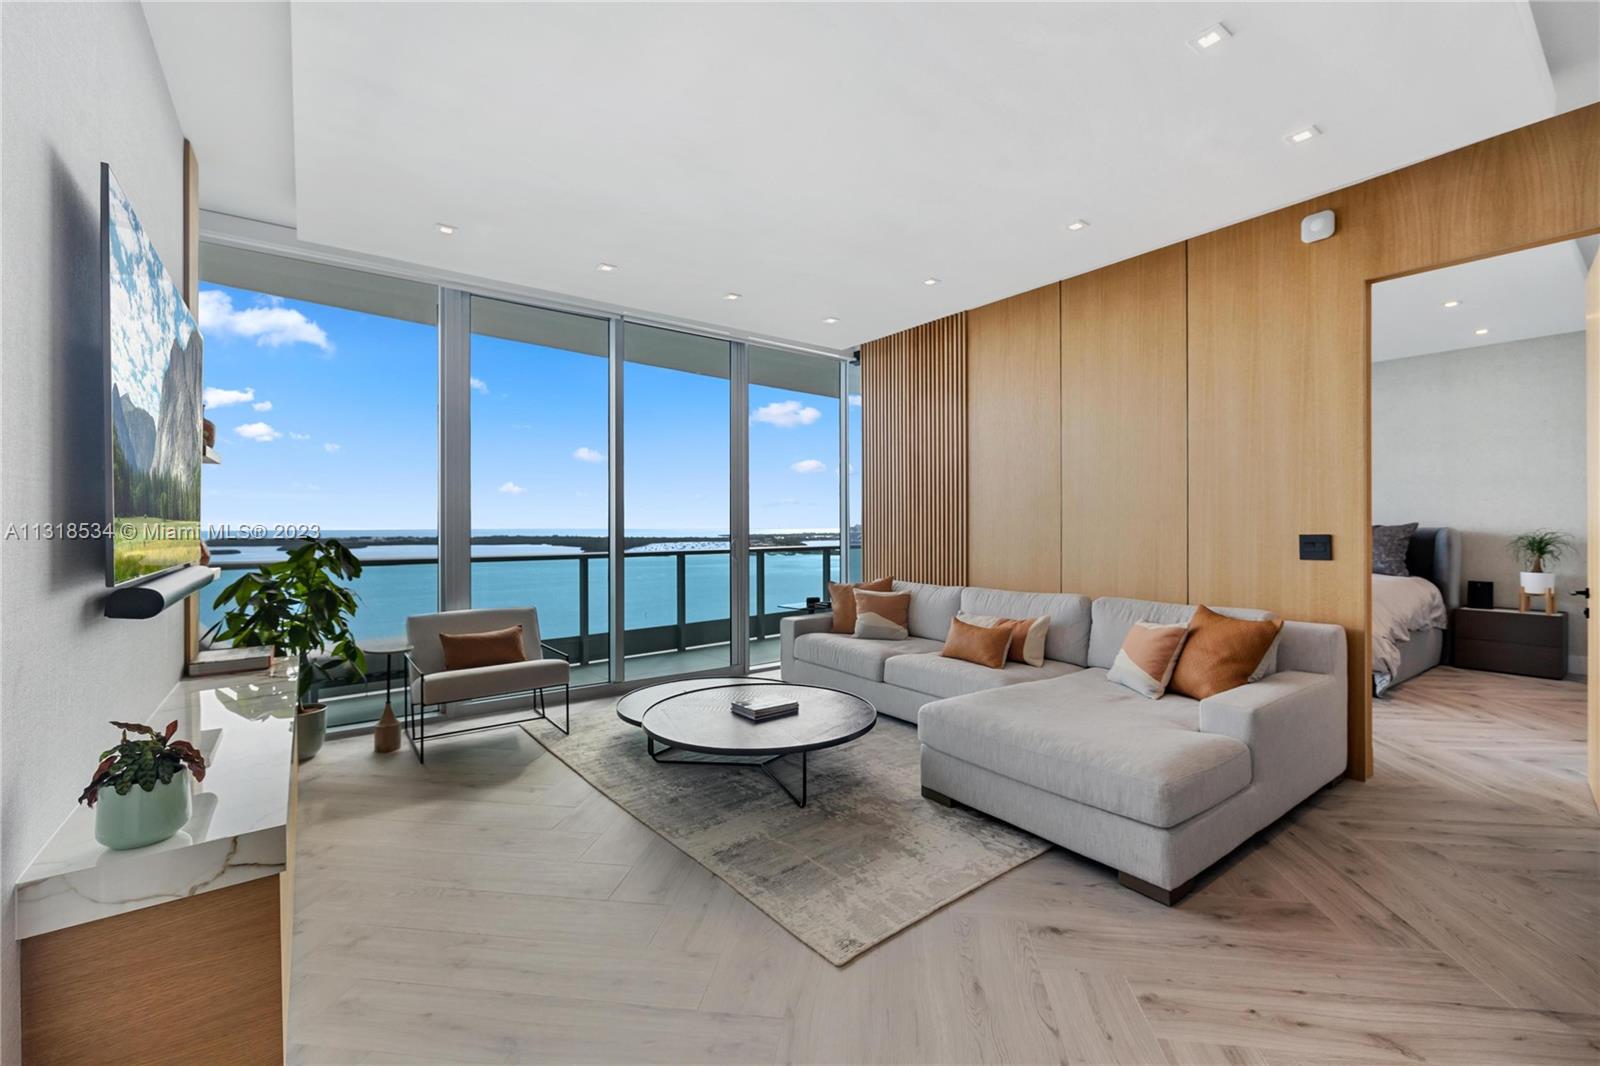 ***3-6 month rental only*** One of a kind completely renovated Jade Brickell turnkey waterfront unit. No detail was spared in this FURNISHED 2 BD 3 BA 1730 SF unit on the 29th floor. The private entry foyer opens up to a custom office looking out to the bay. Custom white oak floors throughout with walk in closets. Furnishings feature Restoration Hardware & Addison House. Washer/Dryer in unit along with 1 valet parking space. Rate may vary depending on length of stay.